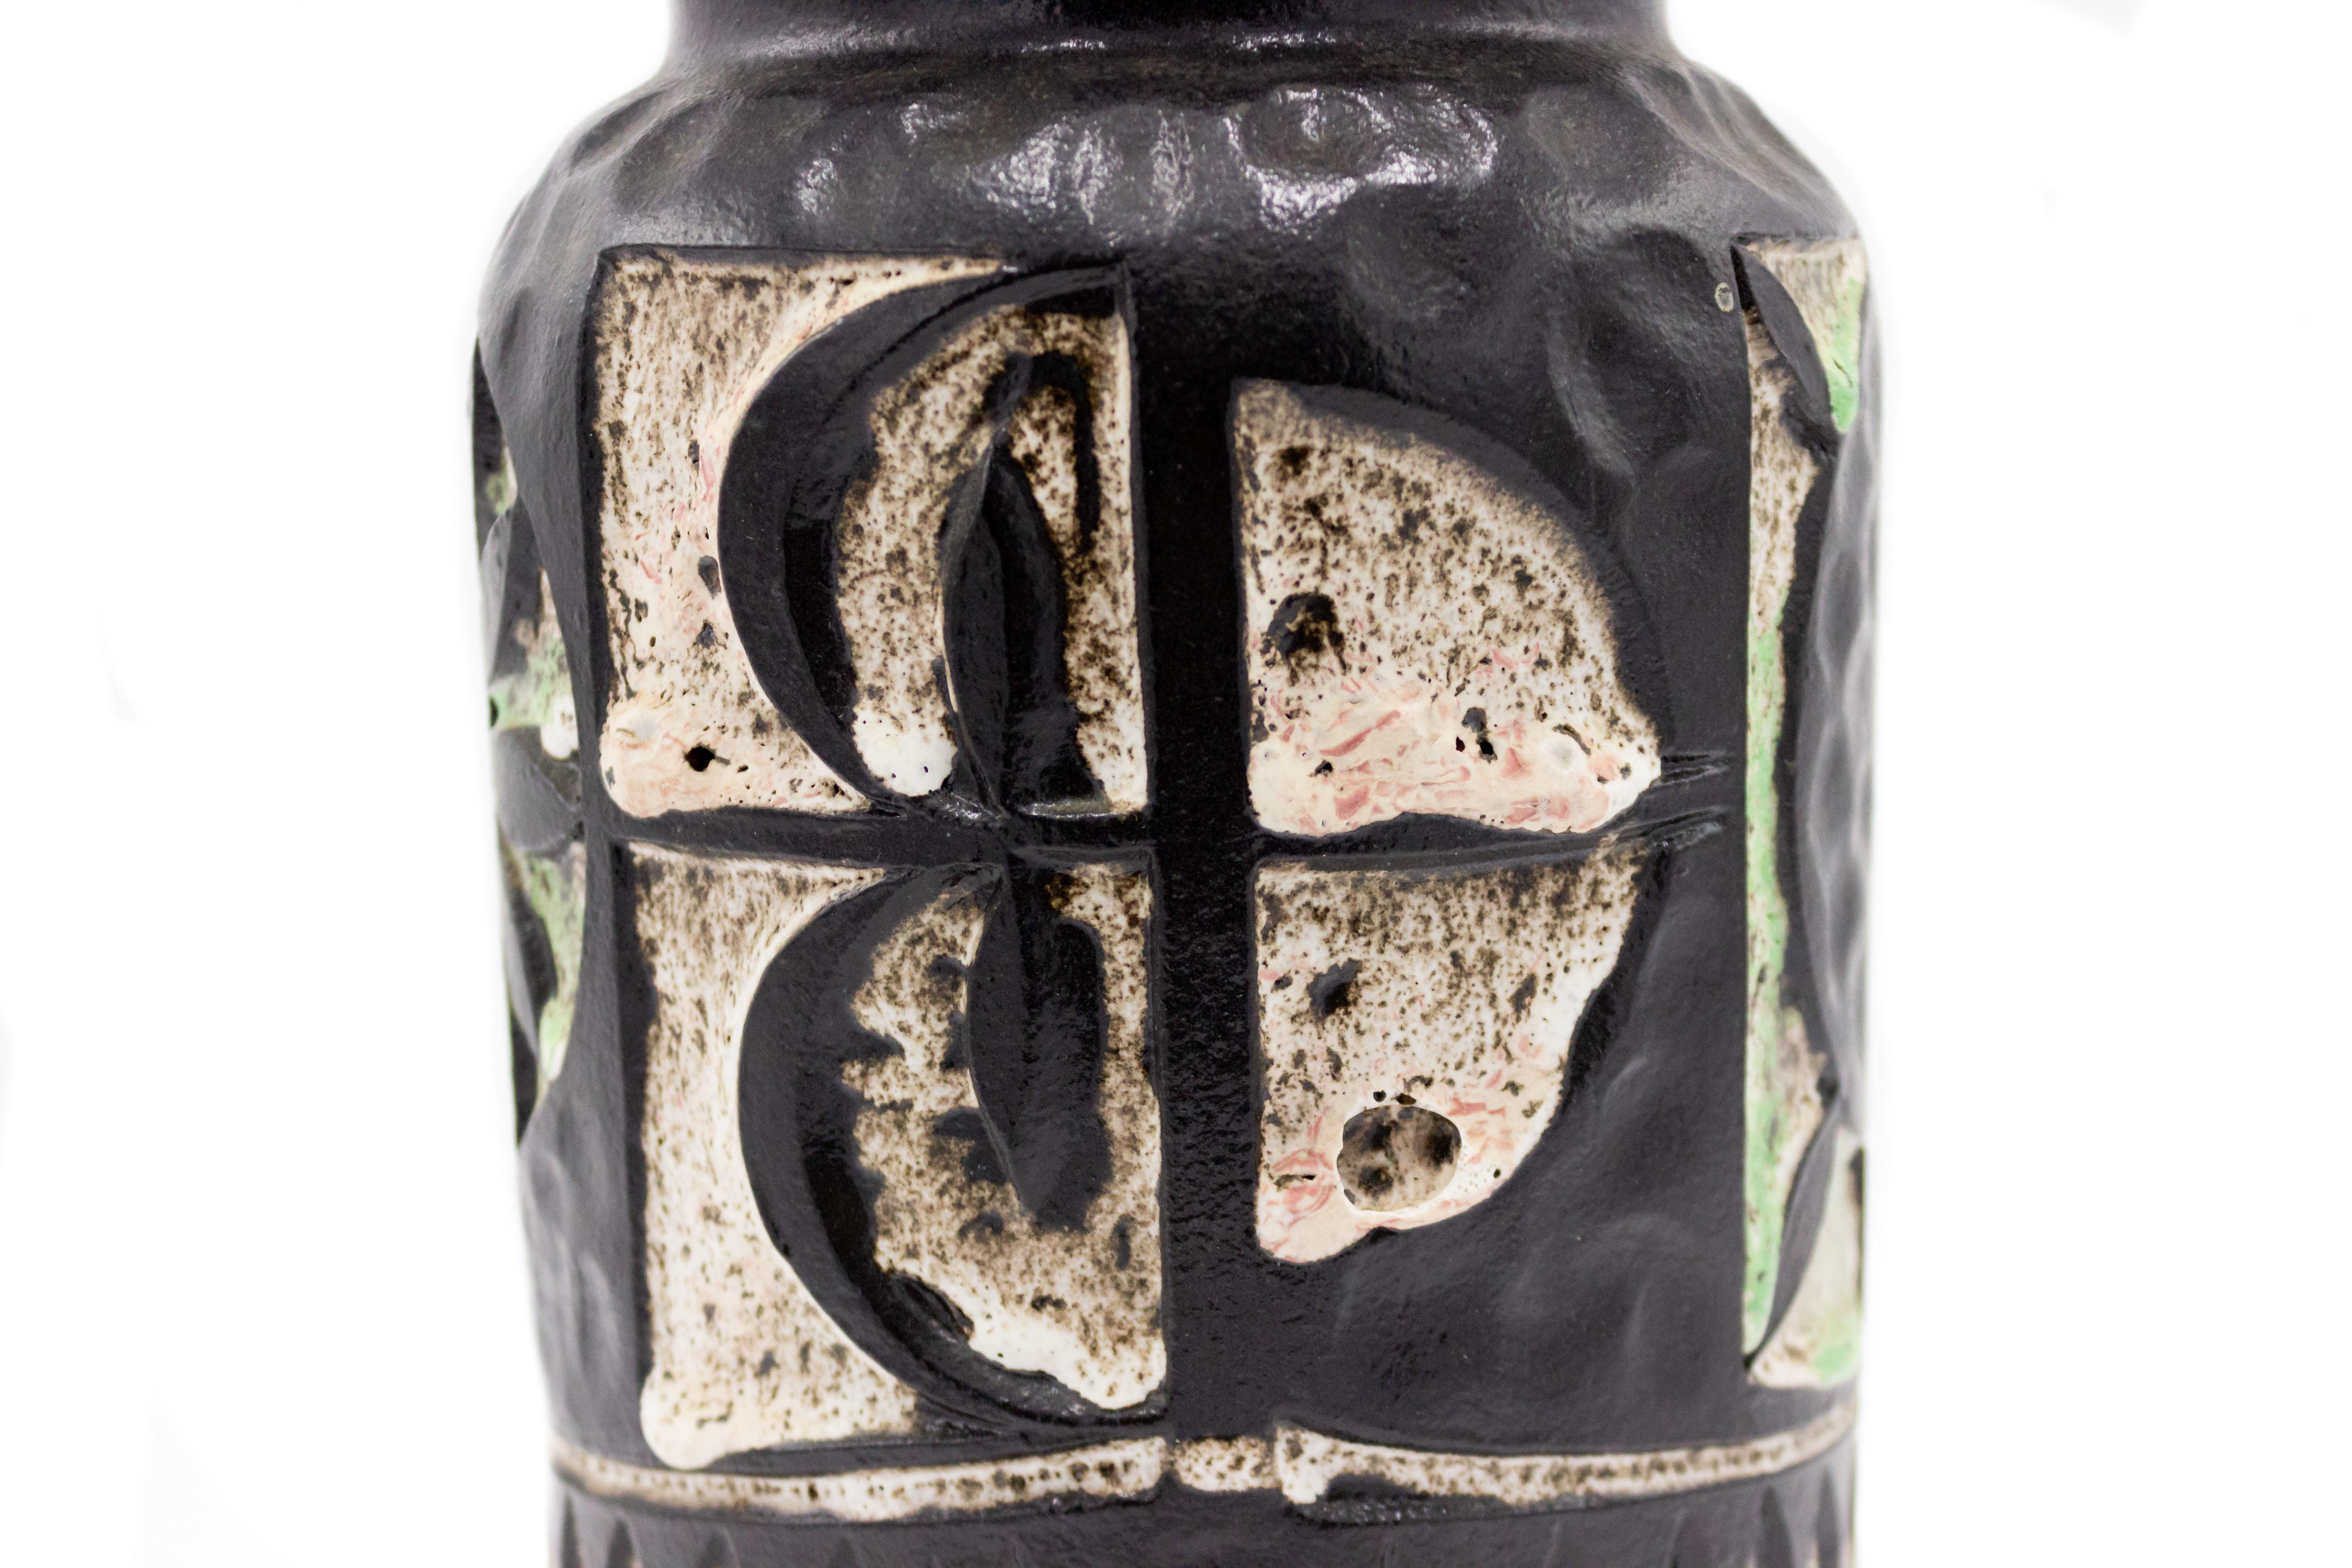 Post War design modernist cylindrical black vase with white and mint green incised floral and geometric patterns.